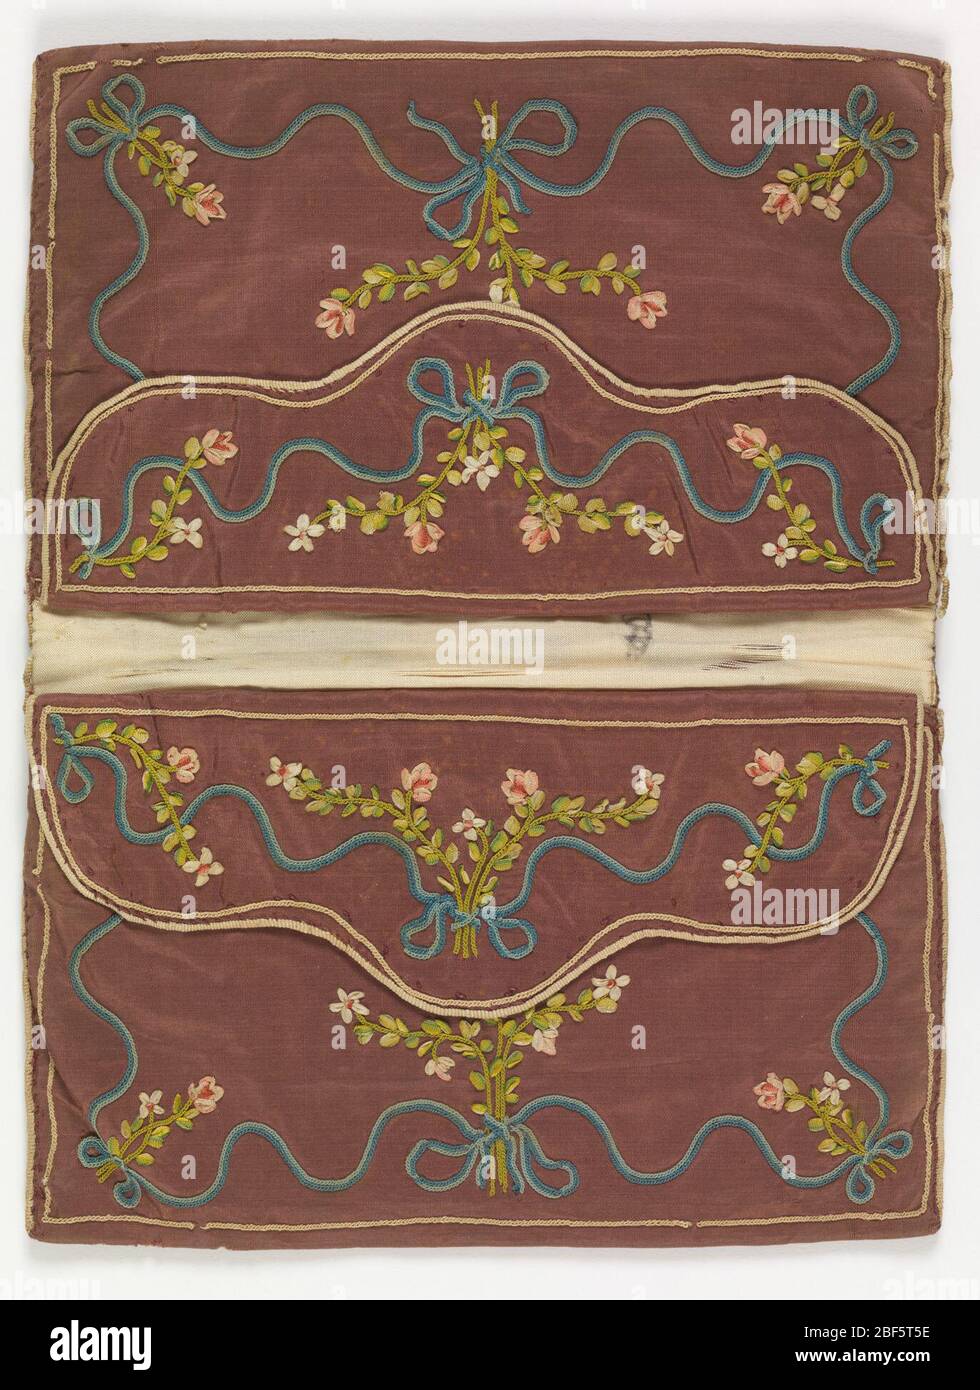 Letter case. Rectangular letter case in purple silk taffeta, now faded, embroidered with ribbons and colored silks. Inside the double envelope are pouches with flaps, all embroidered in similar floral patterns. Lined with white silk taffeta. Stock Photo